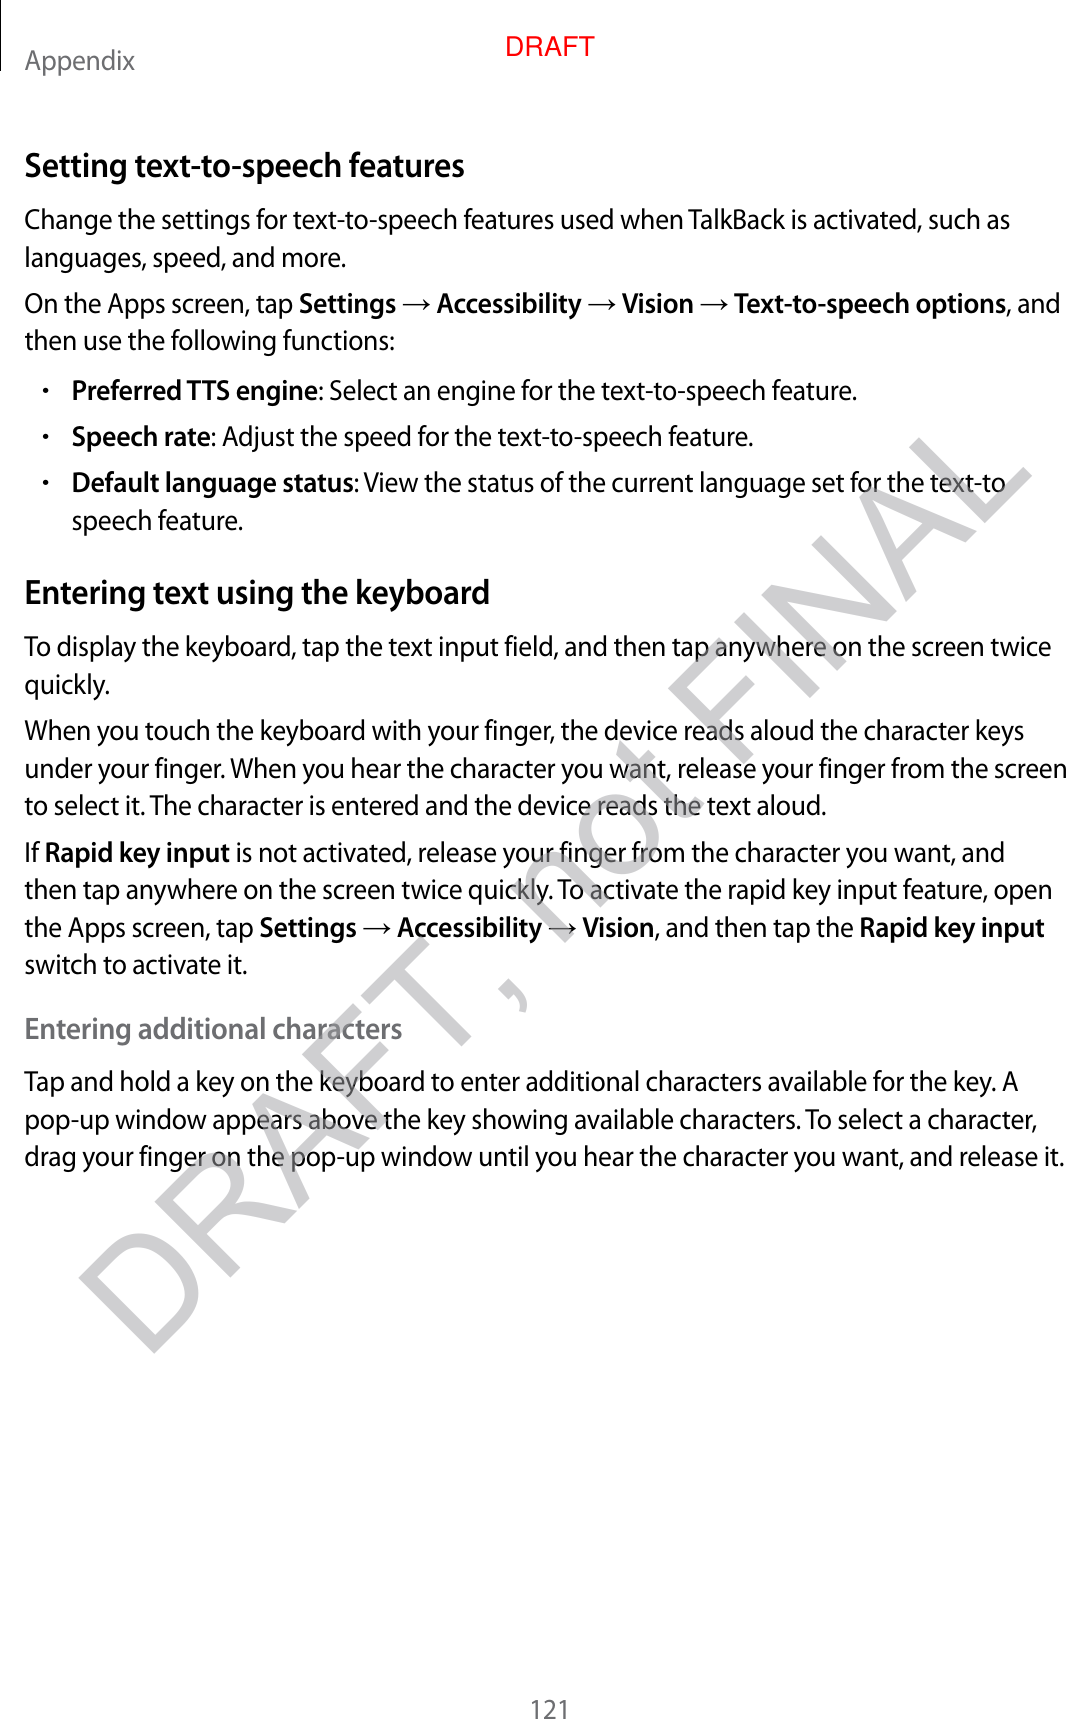 Appendix121Setting text-to-speech featuresChange the settings for text-to-speech features used when TalkBack is activated, such as languages, speed, and more.On the Apps screen, tap Settings  Accessibility  Vision  Text-to-speech options, and then use the following functions:•Preferred TTS engine: Select an engine for the text-to-speech feature.•Speech rate: Adjust the speed for the text-to-speech feature.•Default language status: View the status of the current language set for the text-to speech feature.Entering text using the keyboardTo display the keyboard, tap the text input field, and then tap anywhere on the screen twice quickly.When you touch the keyboard with your finger, the device reads aloud the character keys under your finger. When you hear the character you want, release your finger from the screen to select it. The character is entered and the device reads the text aloud.If Rapid key input is not activated, release your finger from the character you want, and then tap anywhere on the screen twice quickly. To activate the rapid key input feature, open the Apps screen, tap Settings  Accessibility  Vision, and then tap the Rapid key input switch to activate it.Entering additional charactersTap and hold a key on the keyboard to enter additional characters available for the key. A pop-up window appears above the key showing available characters. To select a character, drag your finger on the pop-up window until you hear the character you want, and release it.DRAFT, not FINALDRAFT